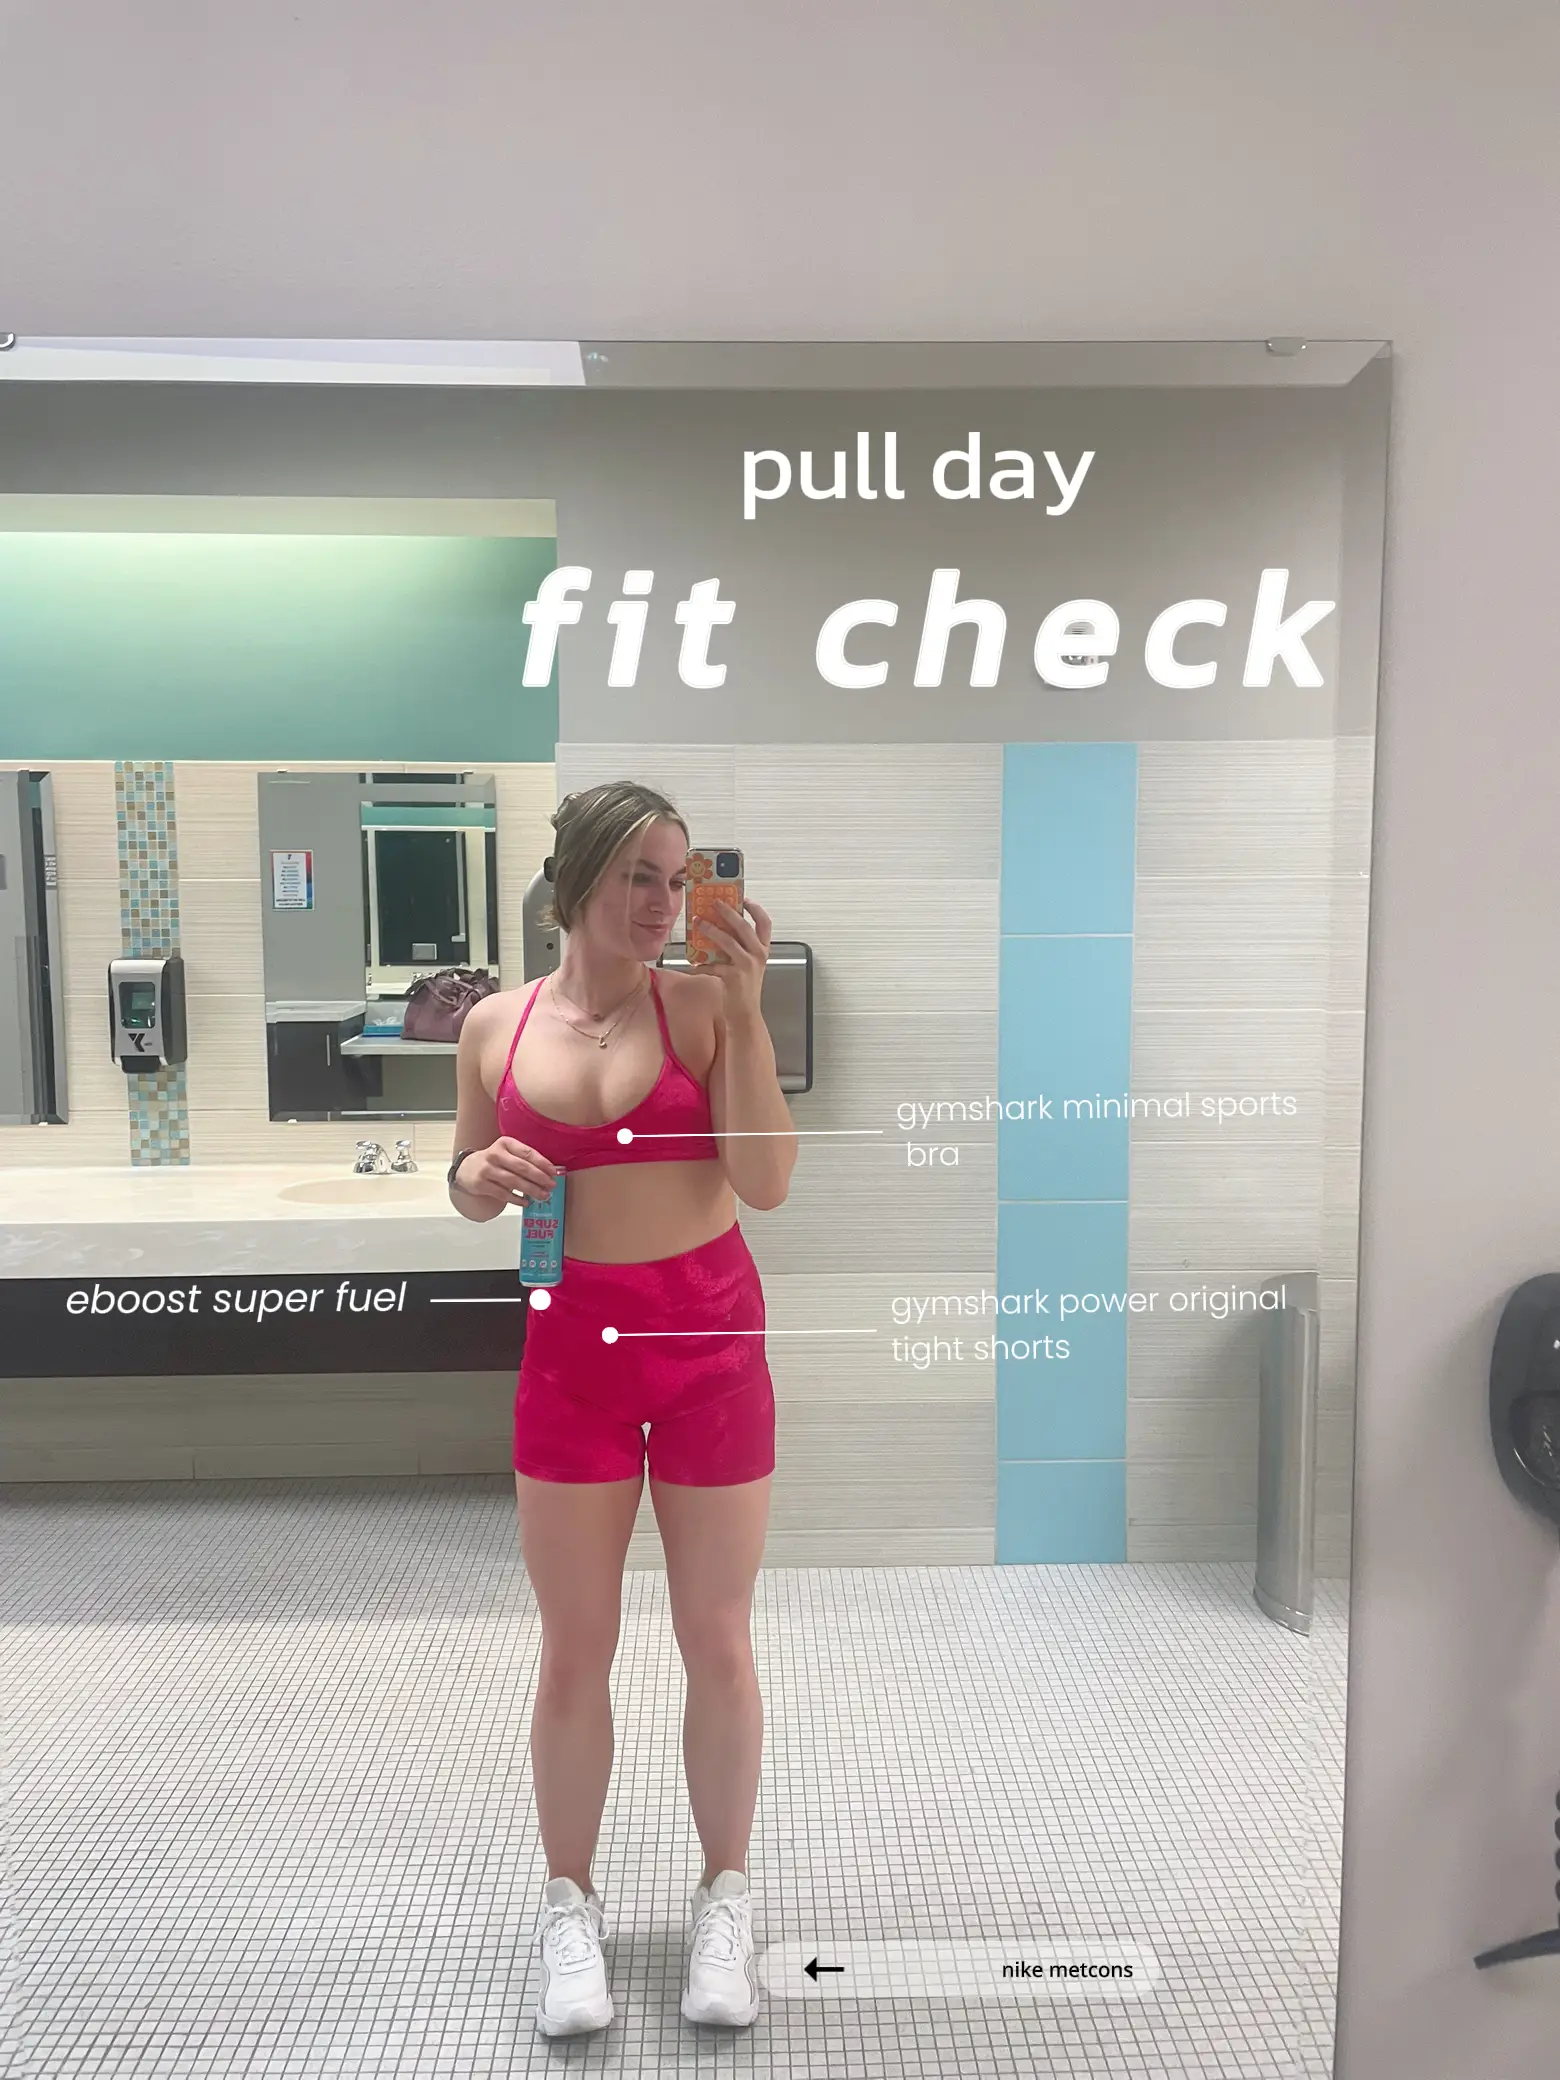 Week of Gymshark Fits, Gallery posted by LauraLeeFitness